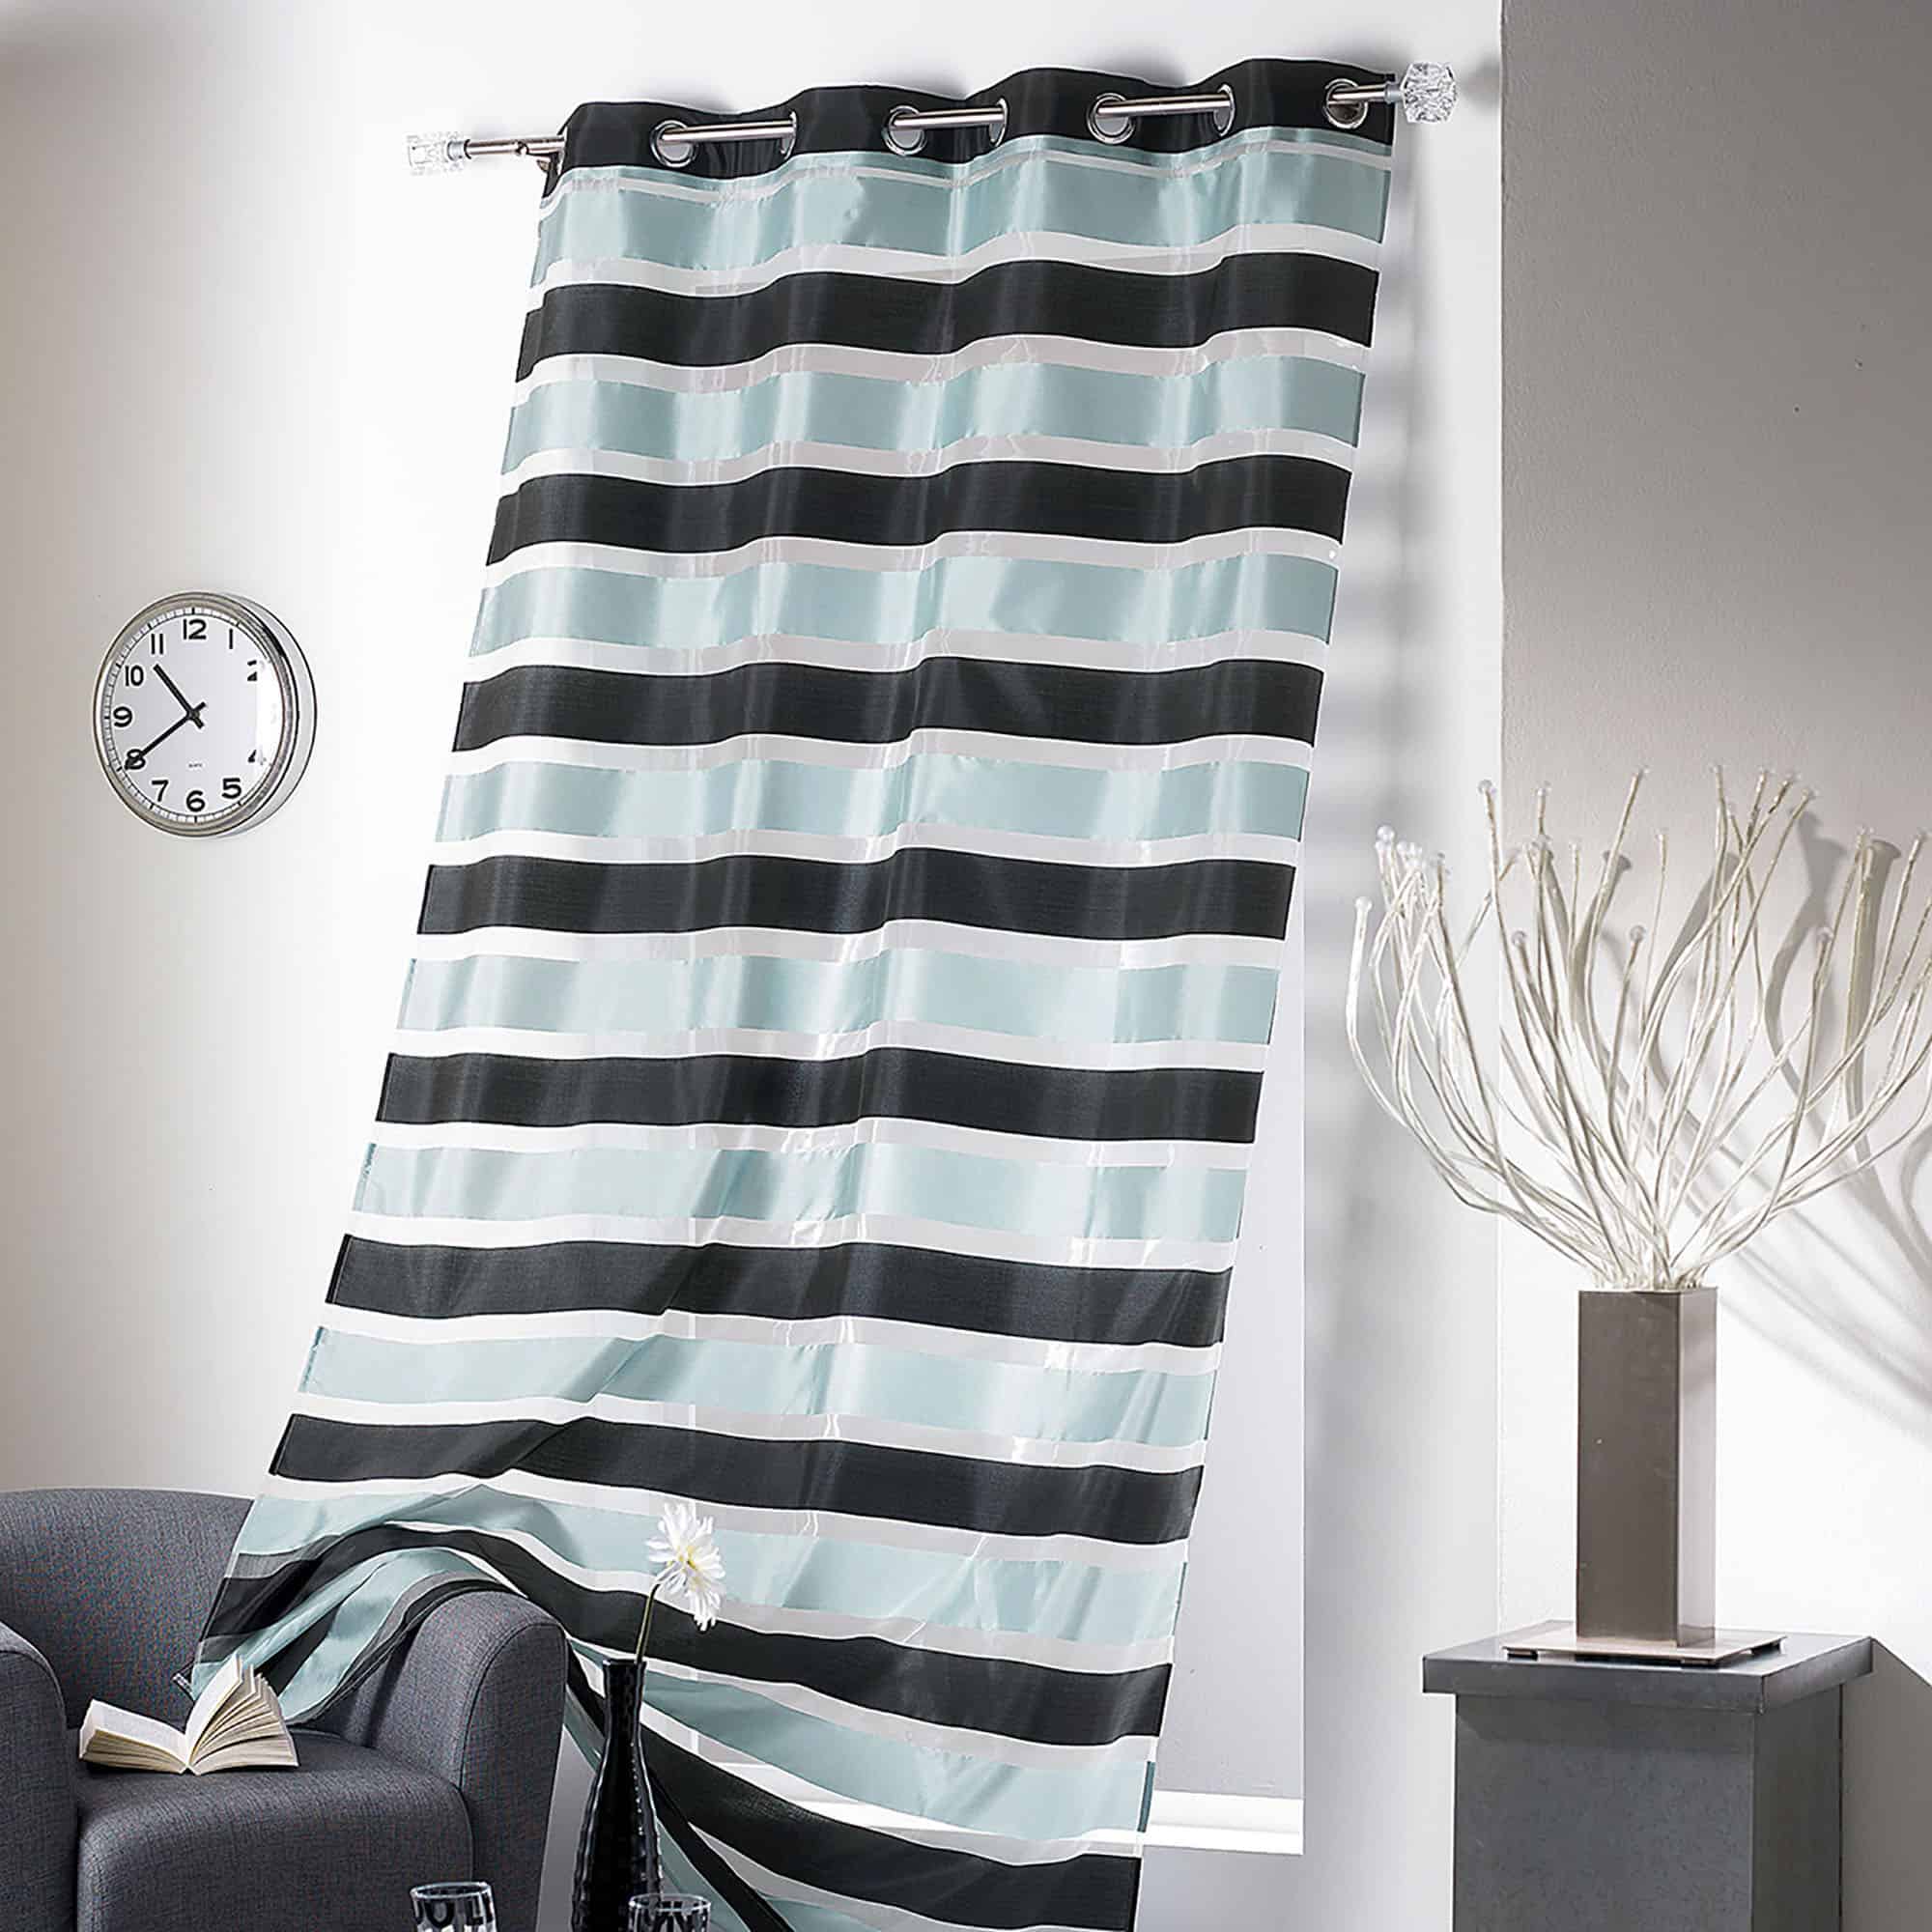 bicolor black blue gray organza striped sheer curtain panel 1 piece for large window